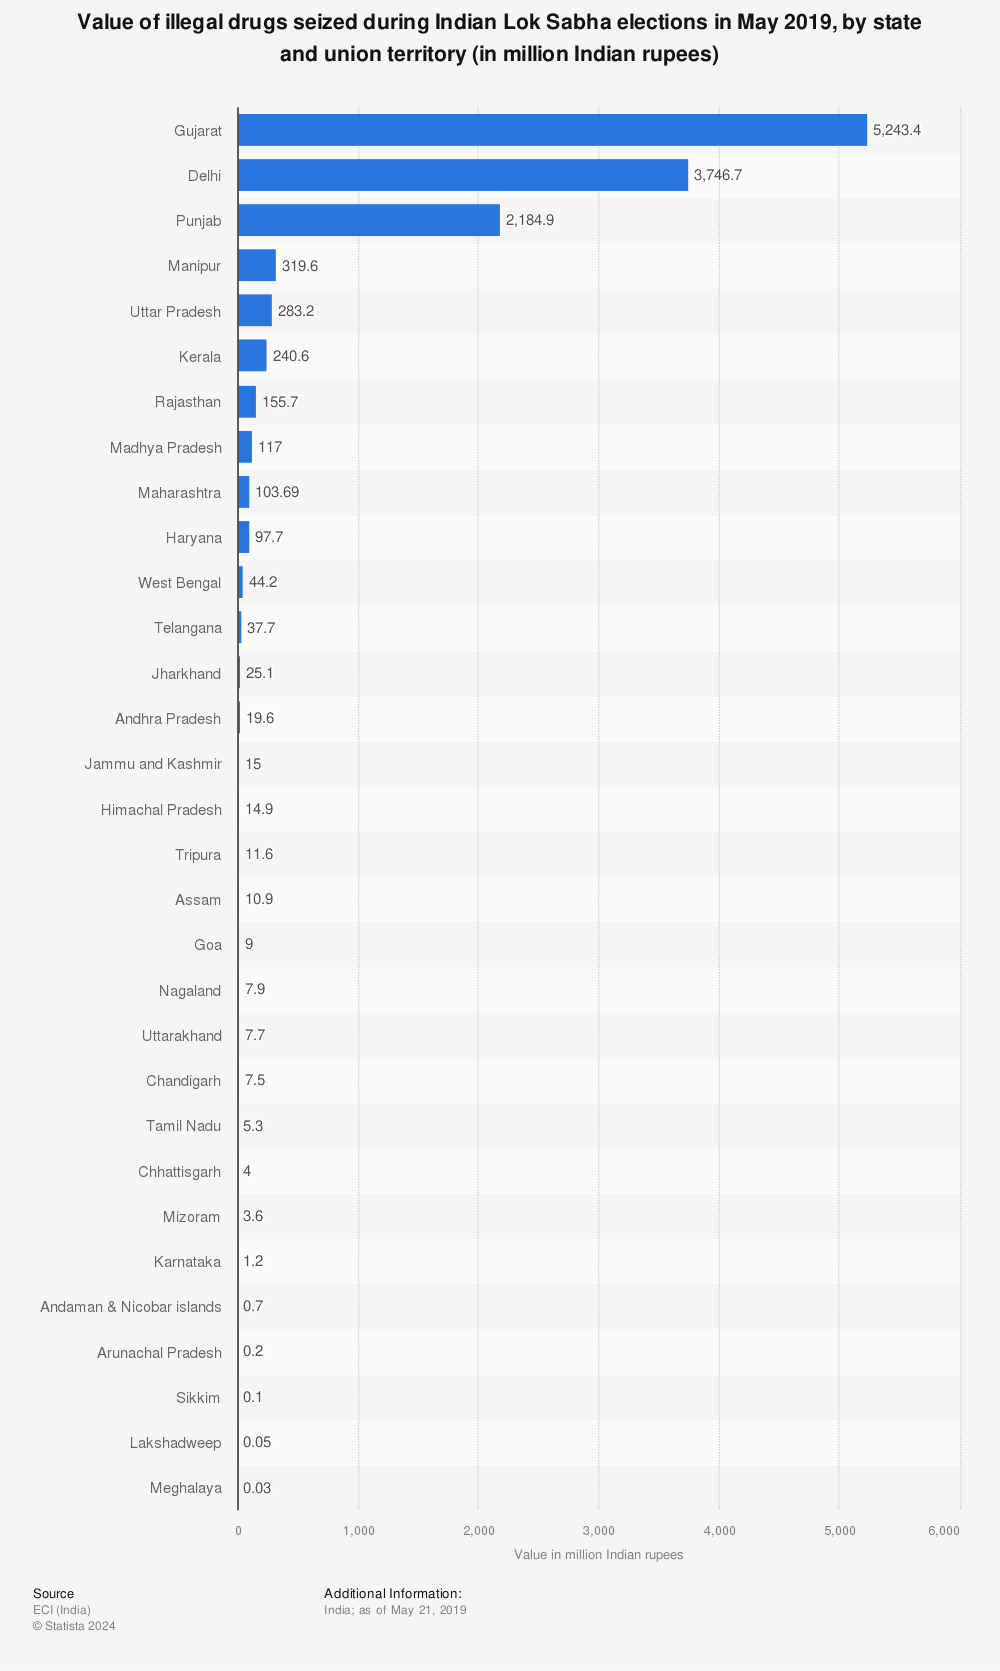 Statistic: Value of illegal drugs seized during Indian Lok Sabha elections in May 2019, by state and union territory (in million Indian rupees) | Statista